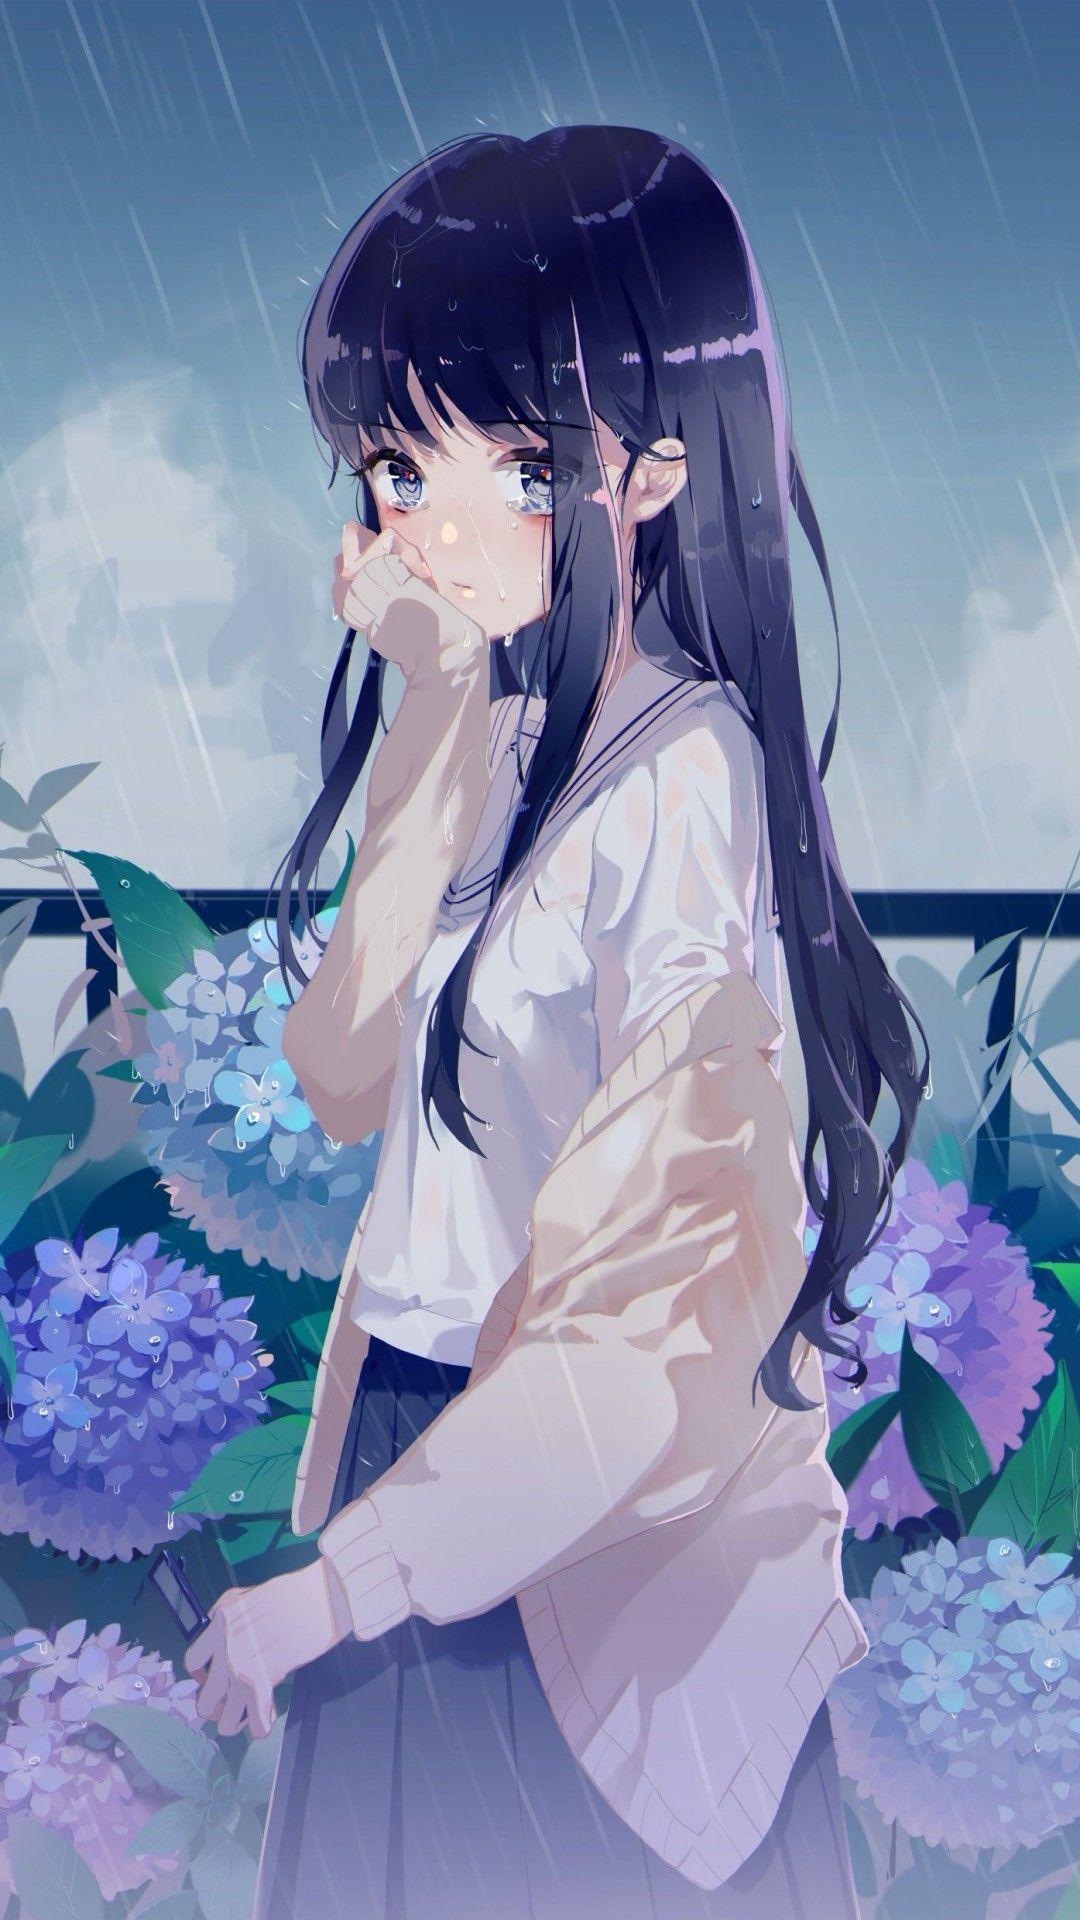 Crying Anime Wallpapers - Top 25 Best Crying Anime Wallpapers Download